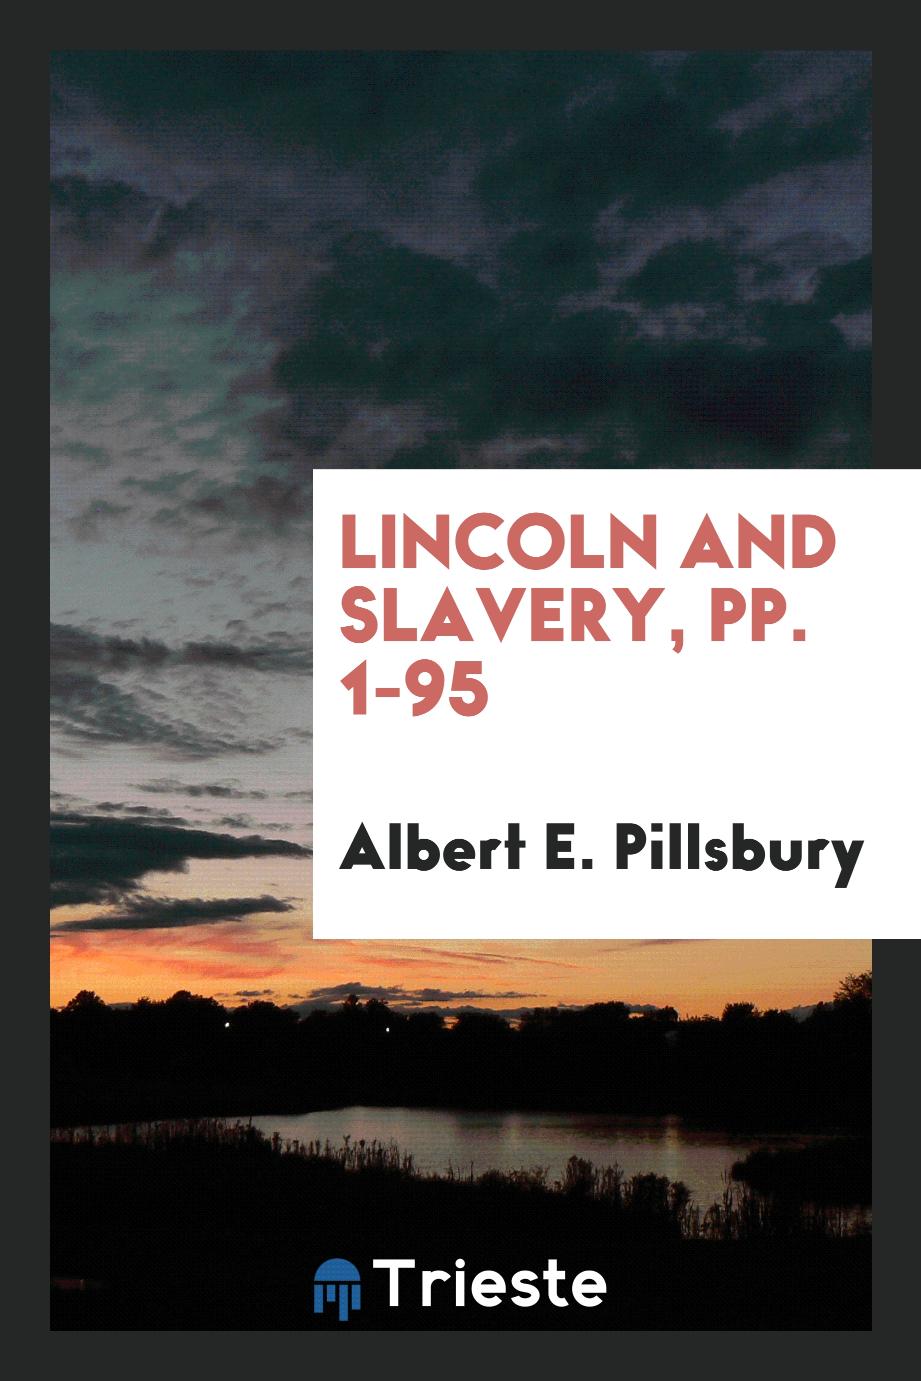 Lincoln and Slavery, pp. 1-95